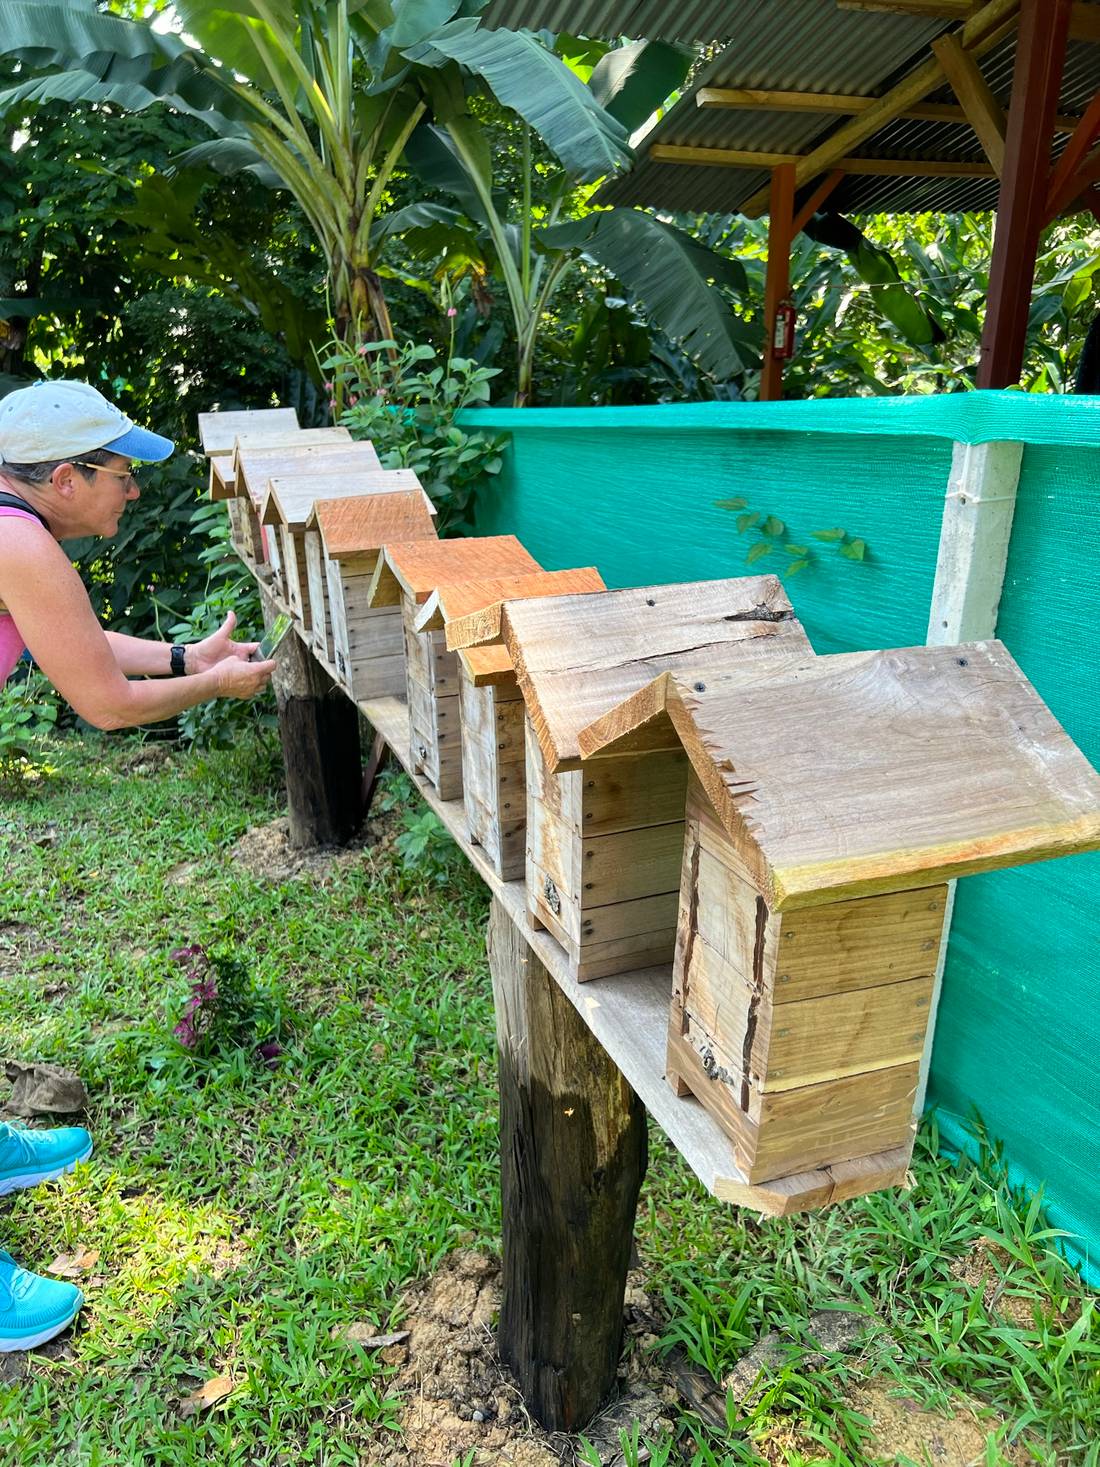 Excursion to the apiary with bees without stingers in Costa Rica. Cruise in the Southern Caribbean.